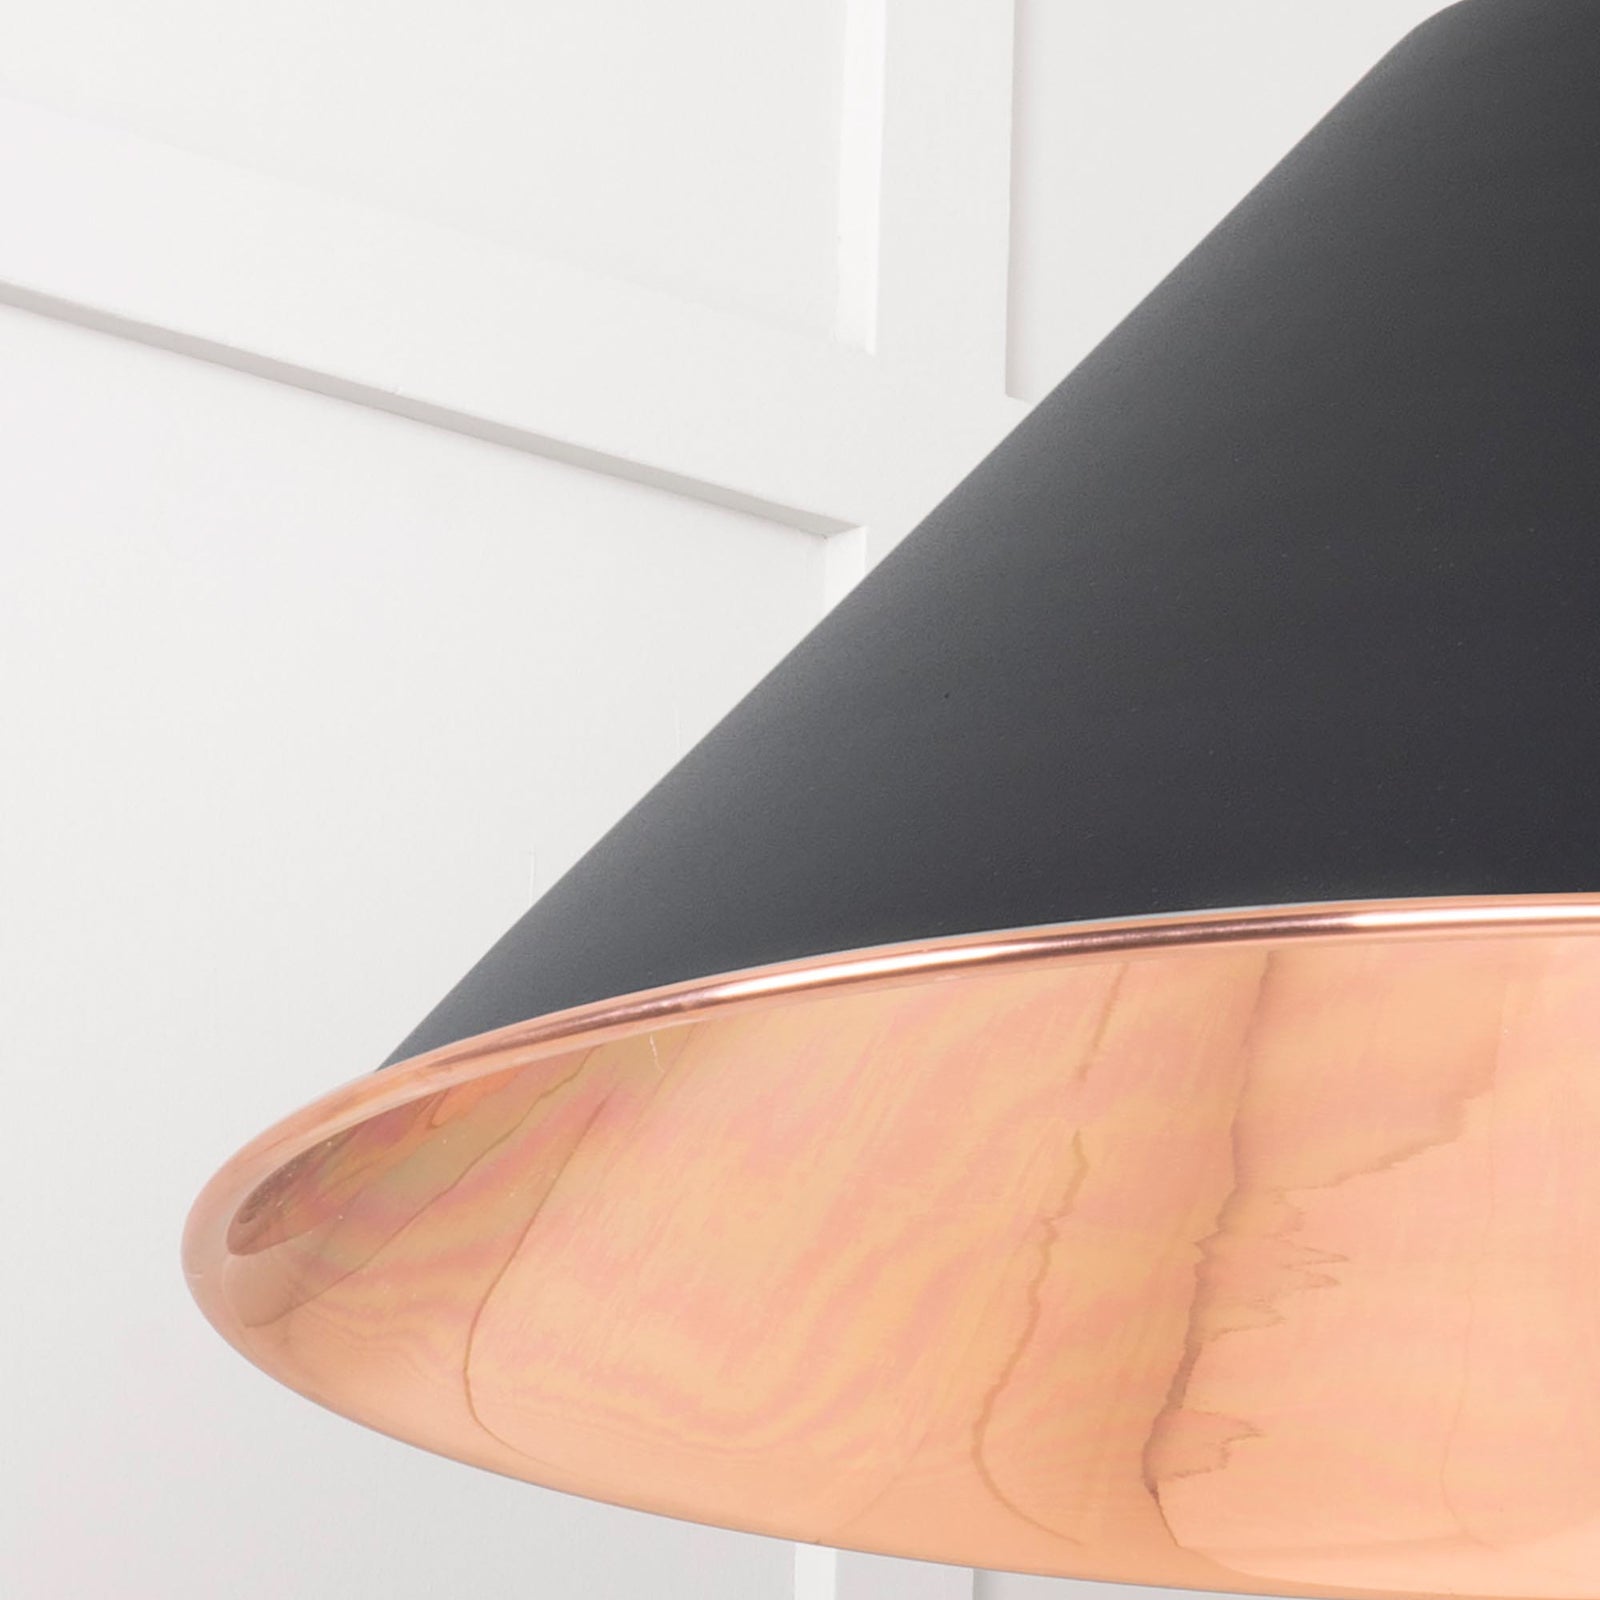 SHOW Close Up Image of Hockley Ceiling Light in Elan Black in Smooth Copper